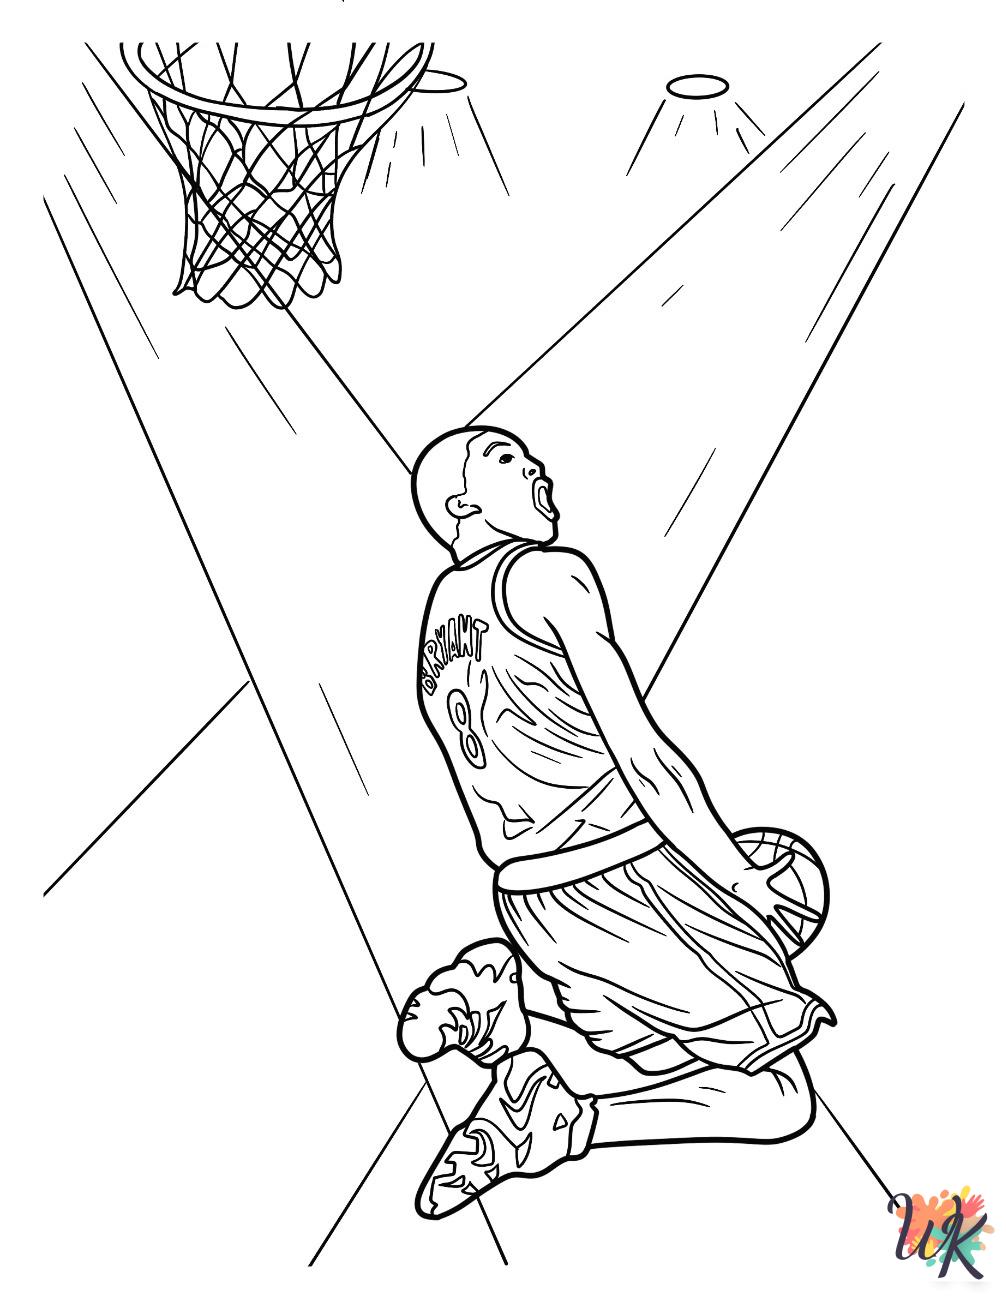 Kobe Bryant coloring pages for adults pdf